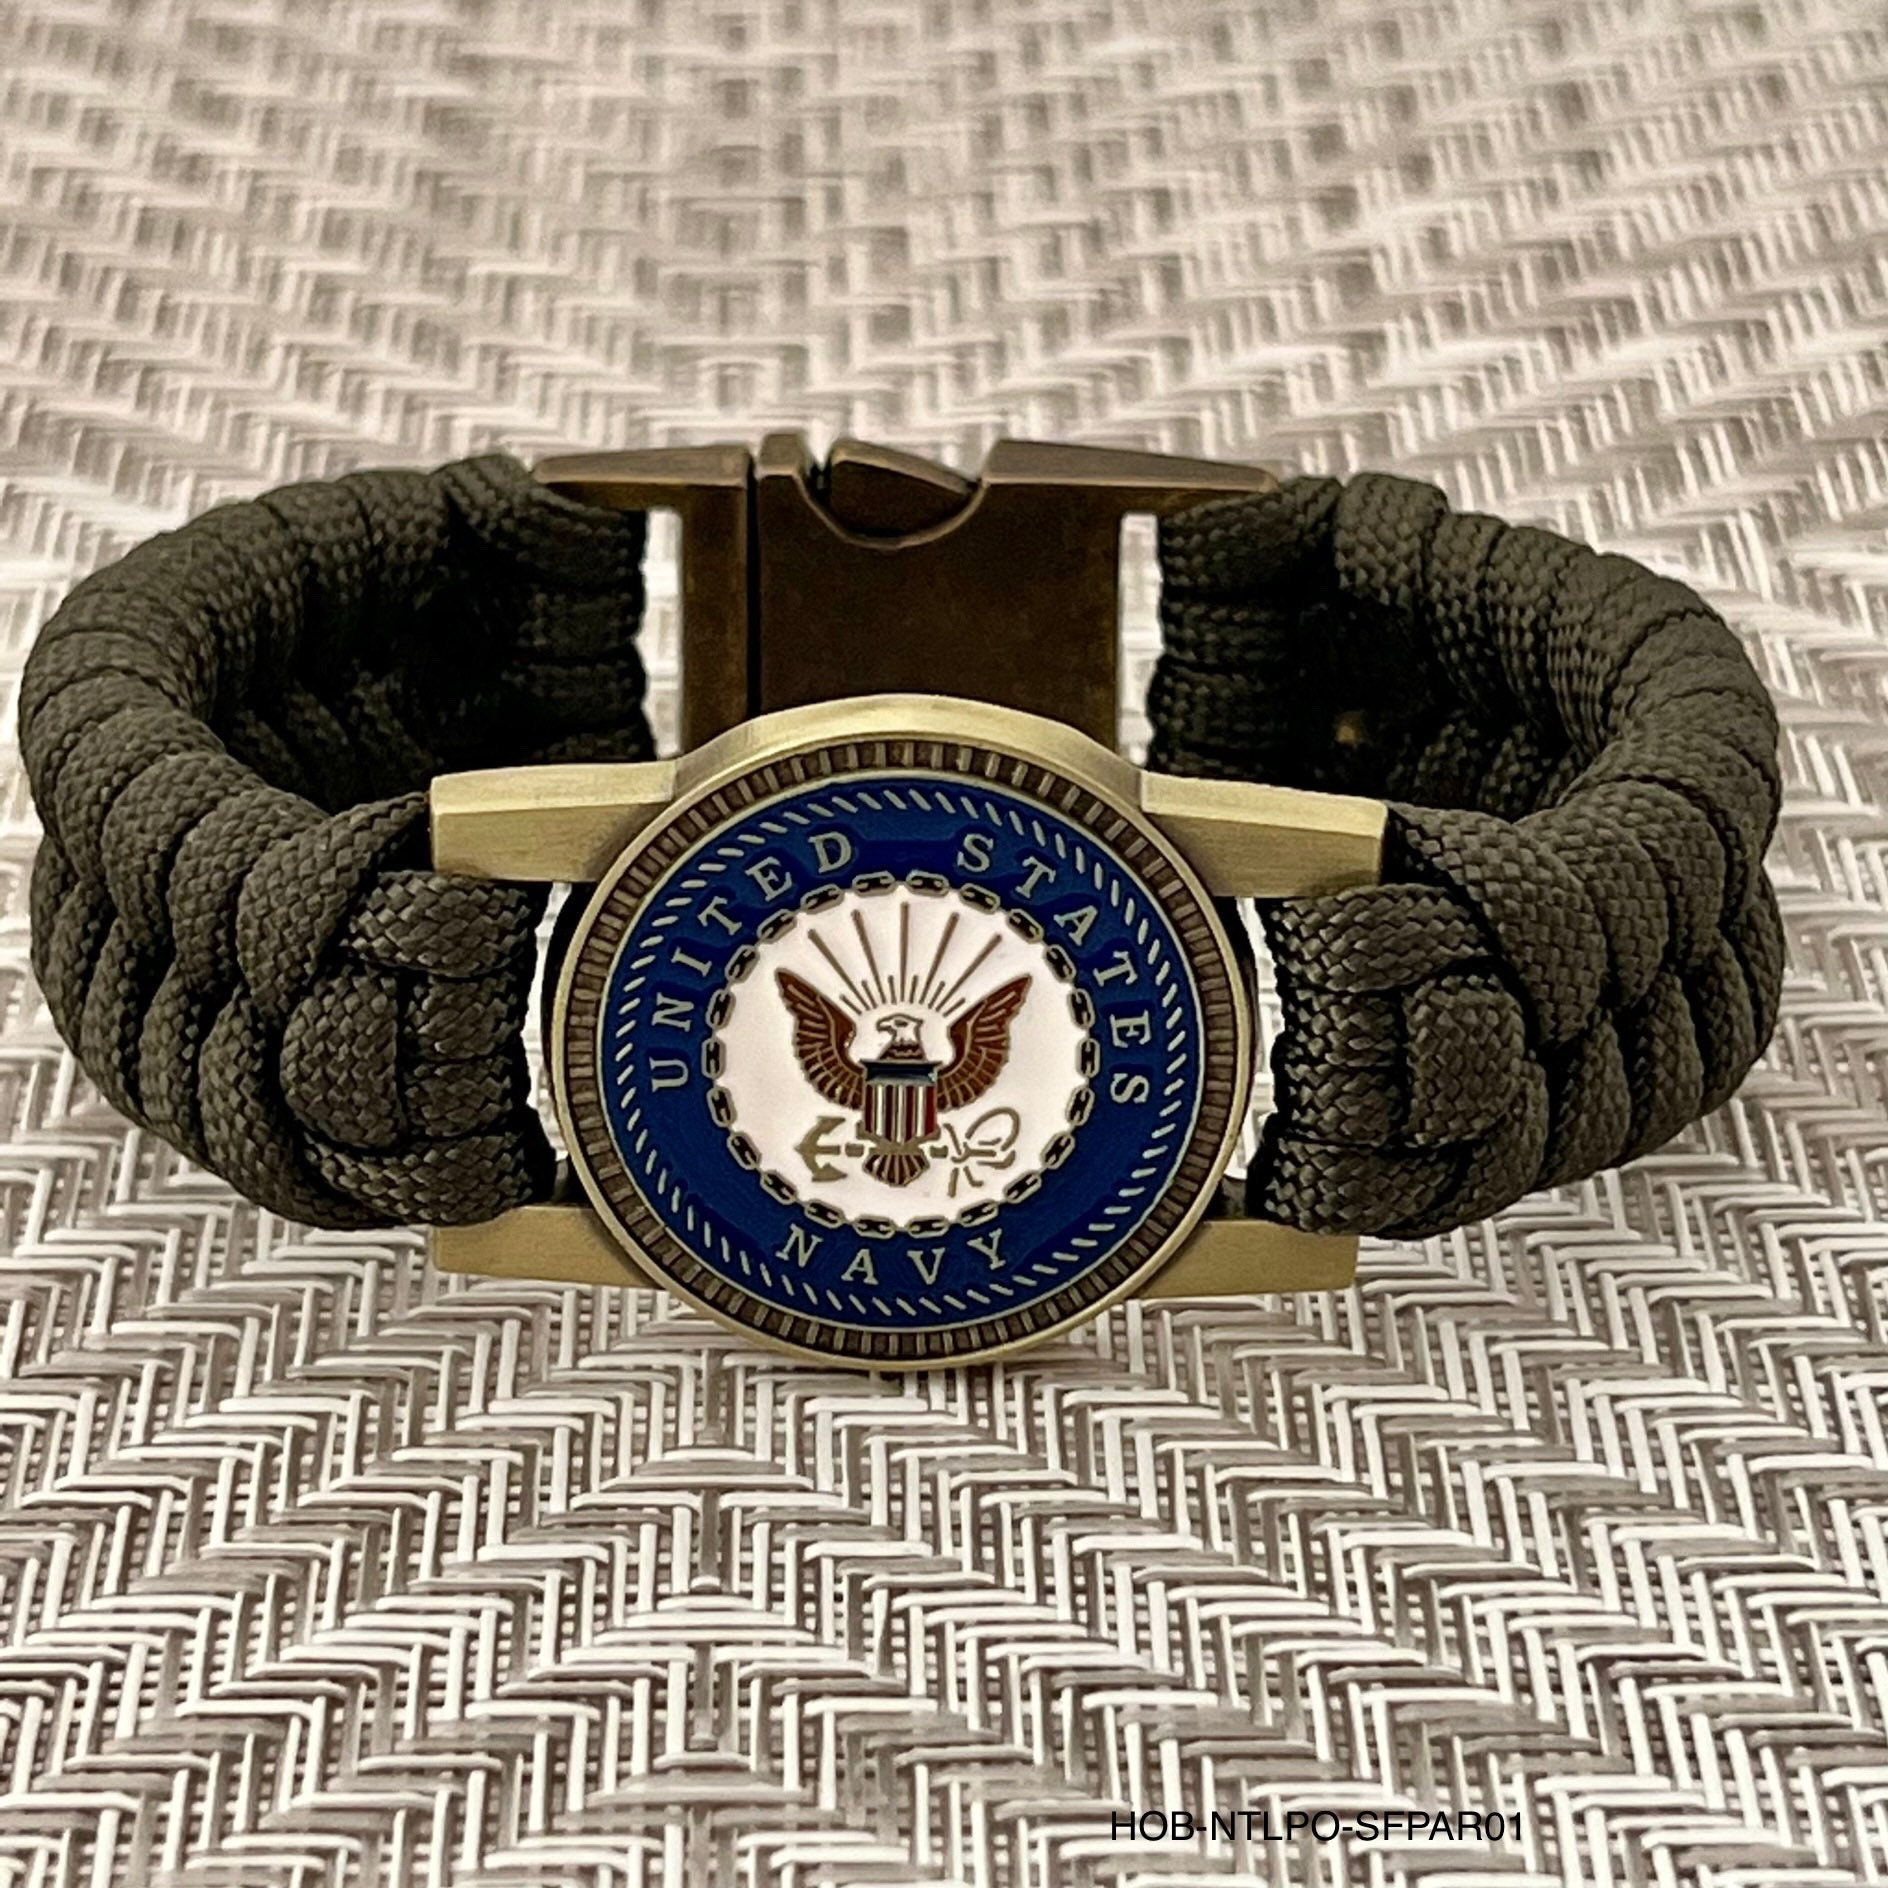 US Navy bracelet, Navy jewelry, United States Navy, veteran gift, gift for  sailor, military jewelry, armed forces gift